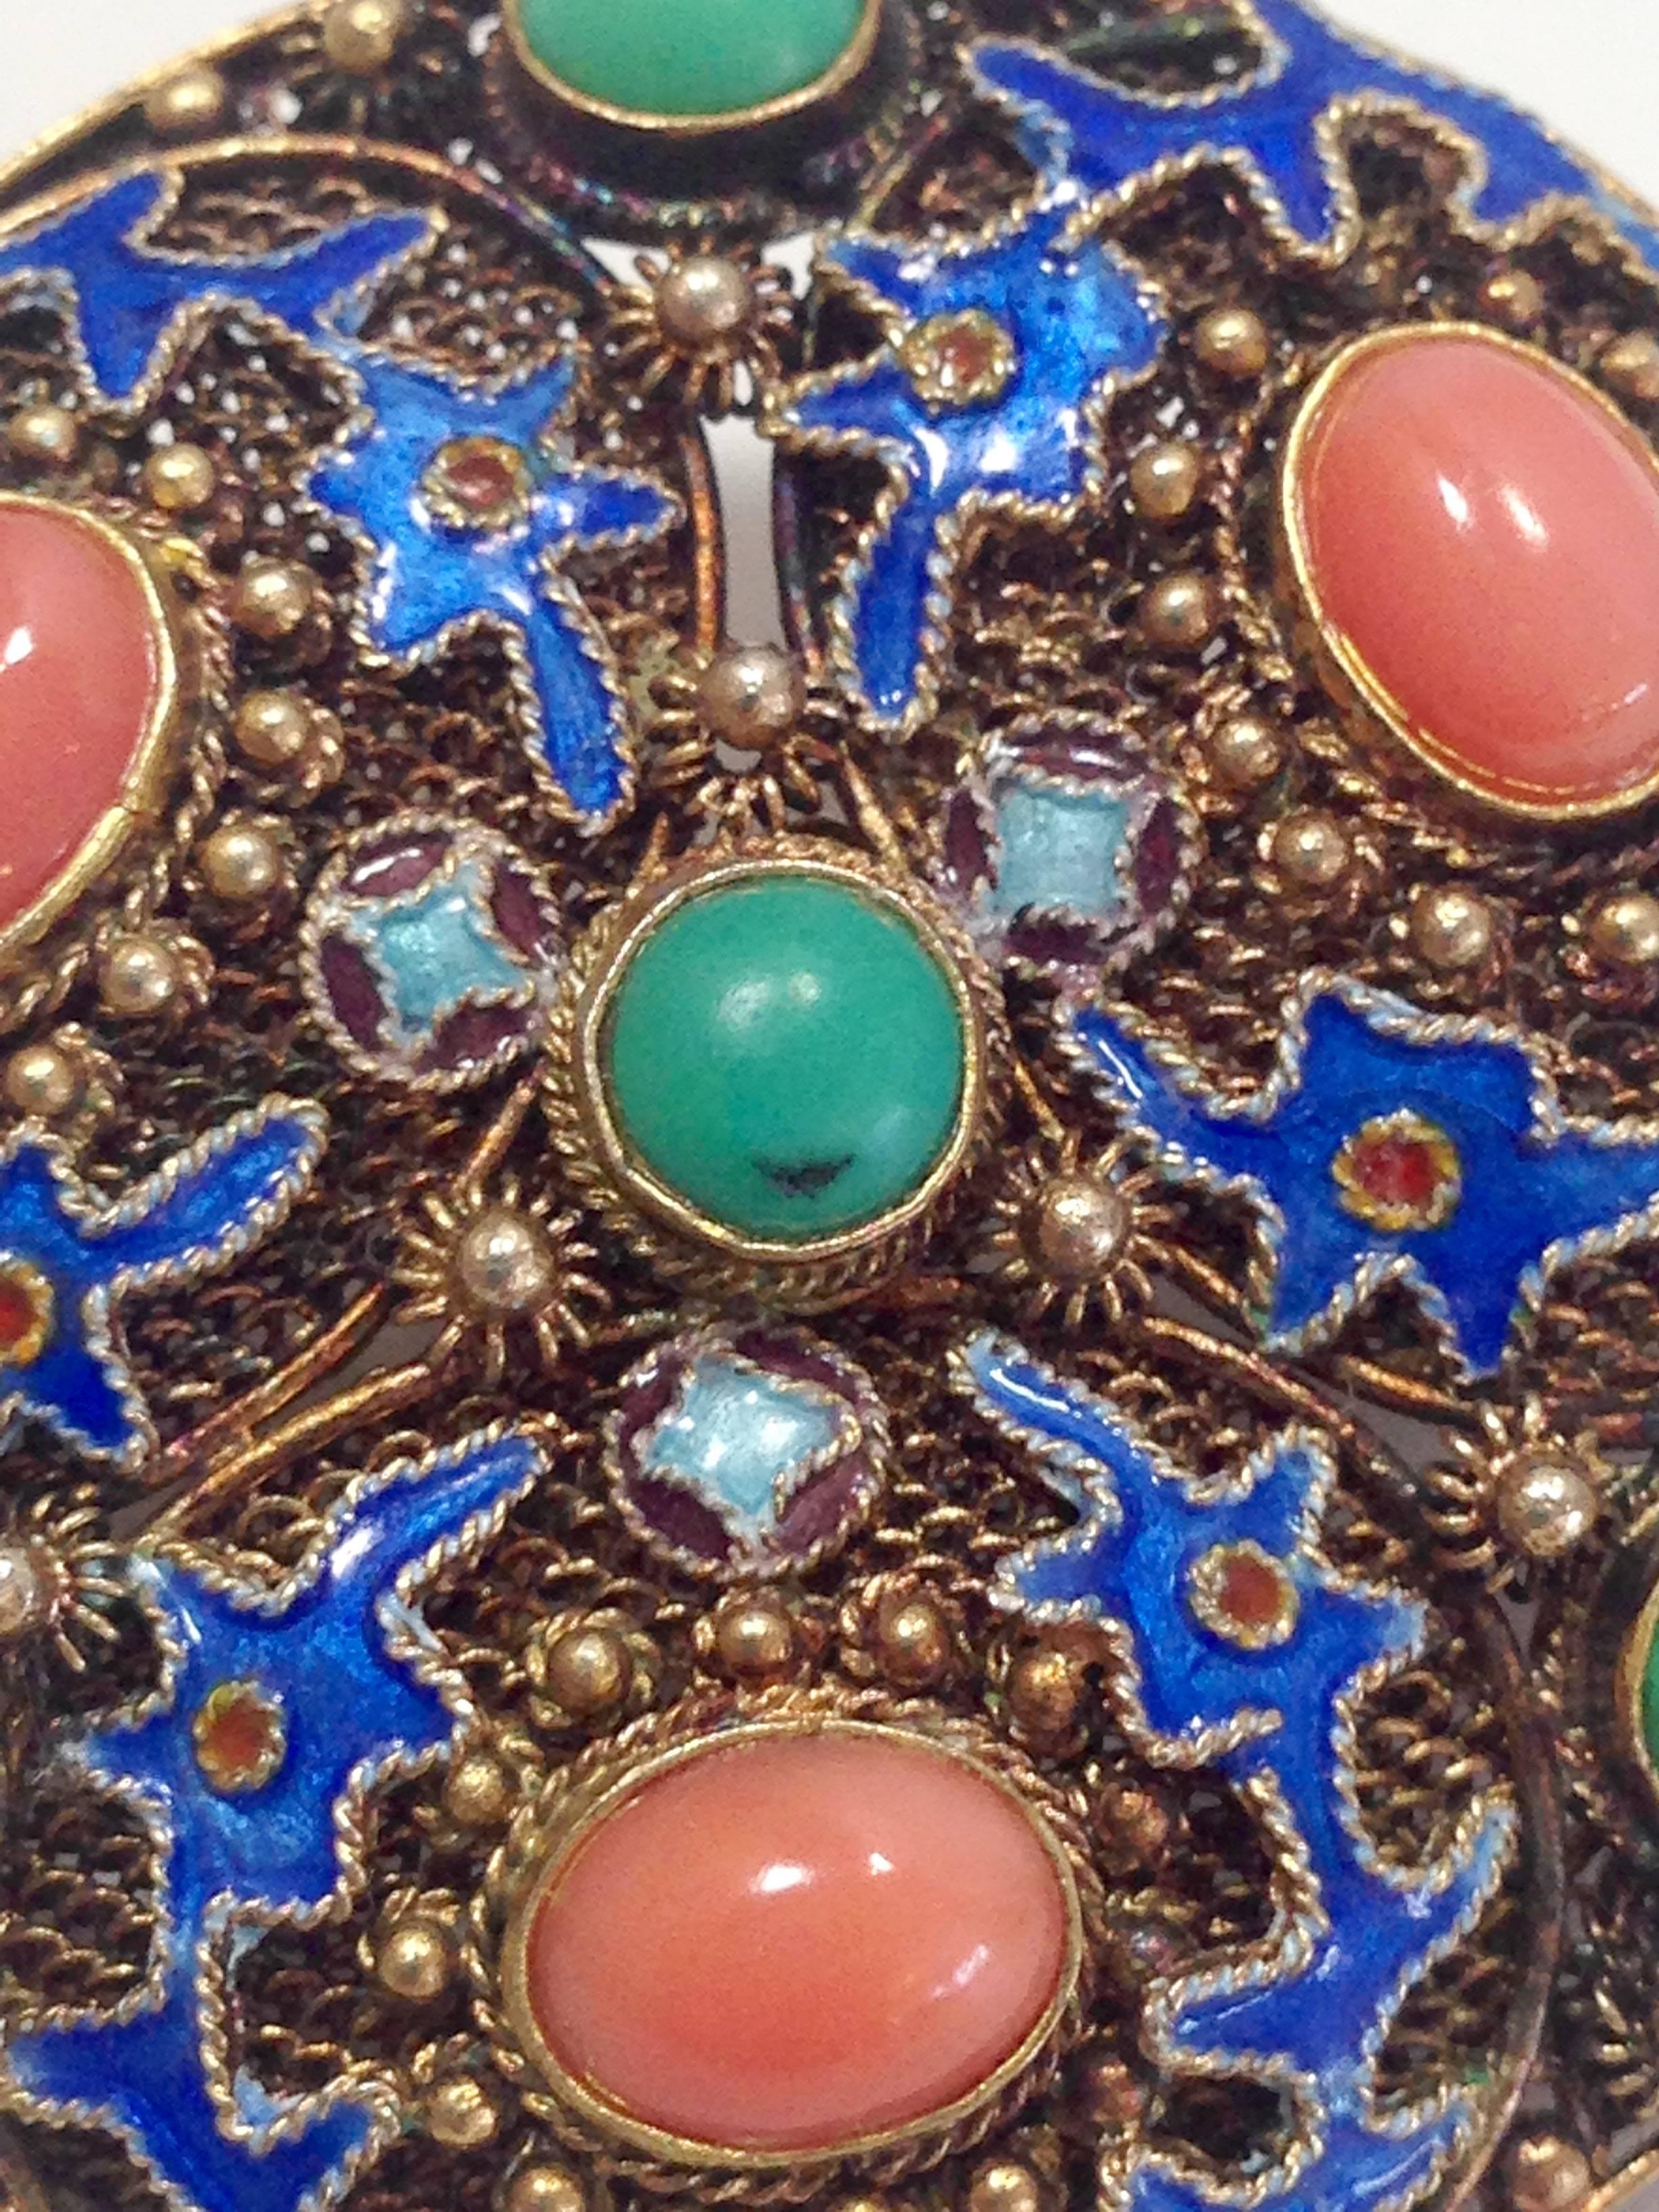 Extremely rare and coveted vintage Chinese brooch with 22-karat gold vermeil over 925 silver base. Three oval cabochon set coral stones and four round turquoise stones with cobalt blue enamel abstract dragon figure cloisonne work. Raised gold dot